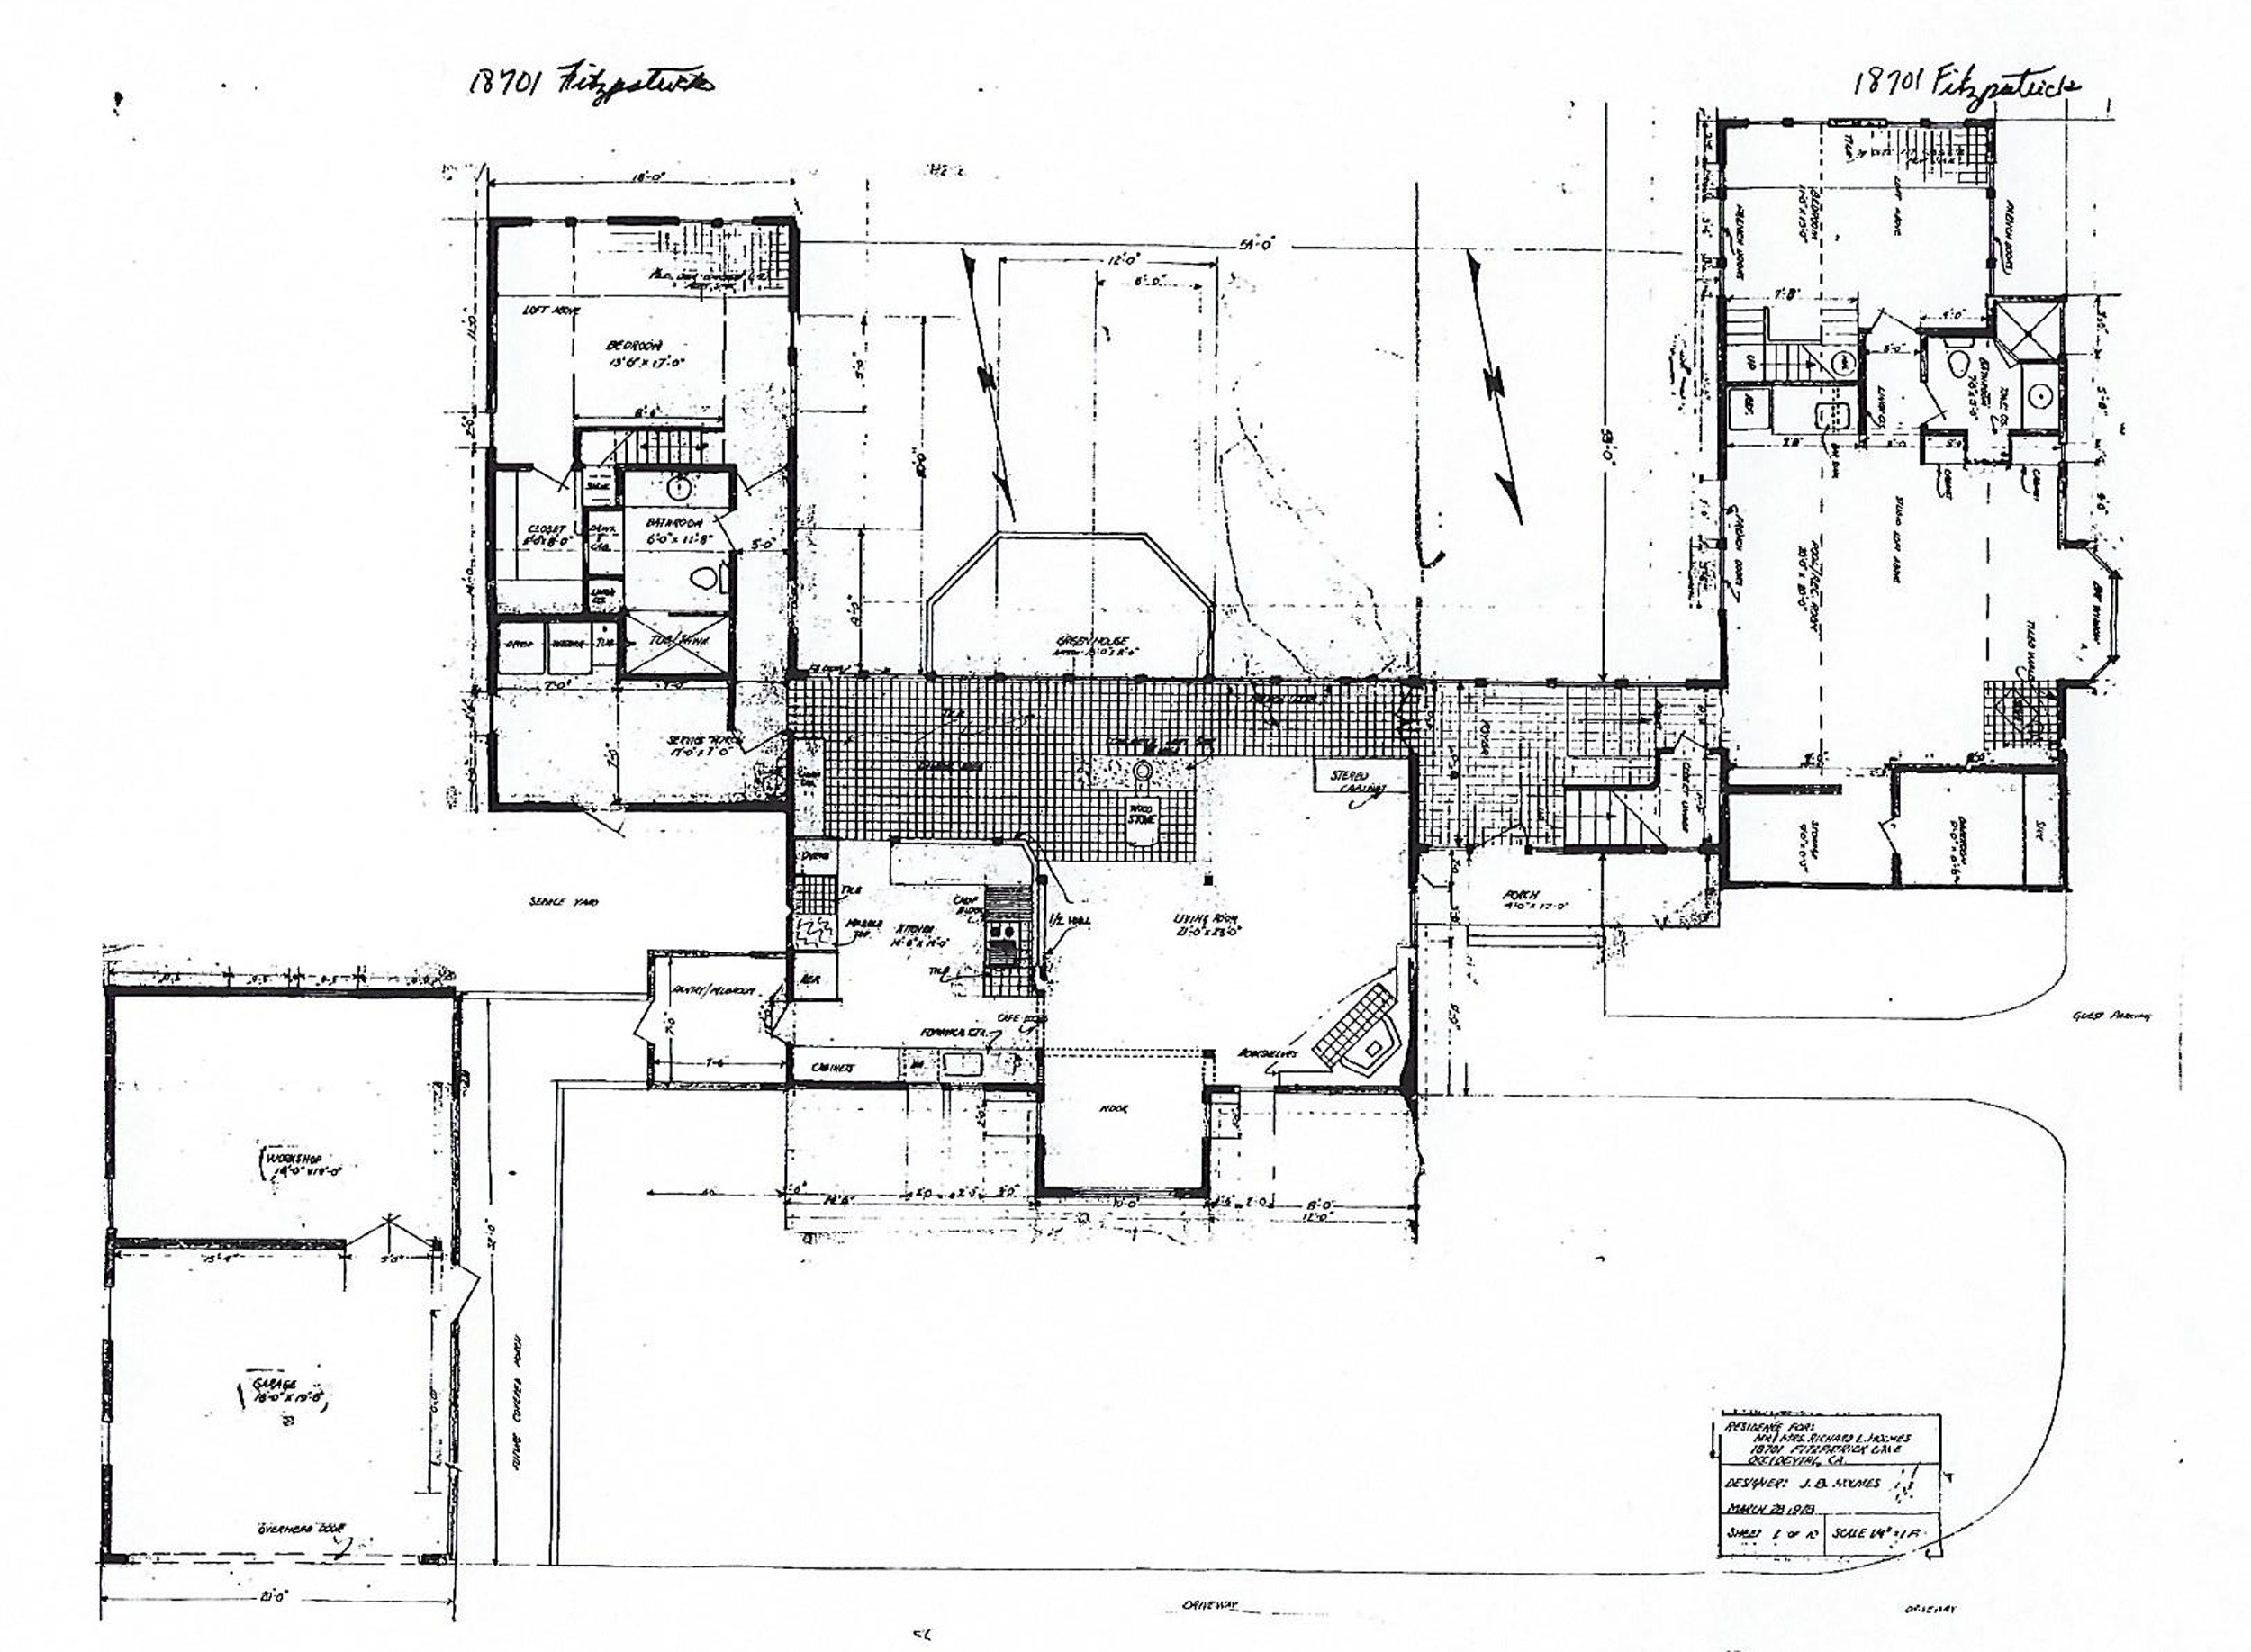 First floor plan - living area with bedrooms on each side